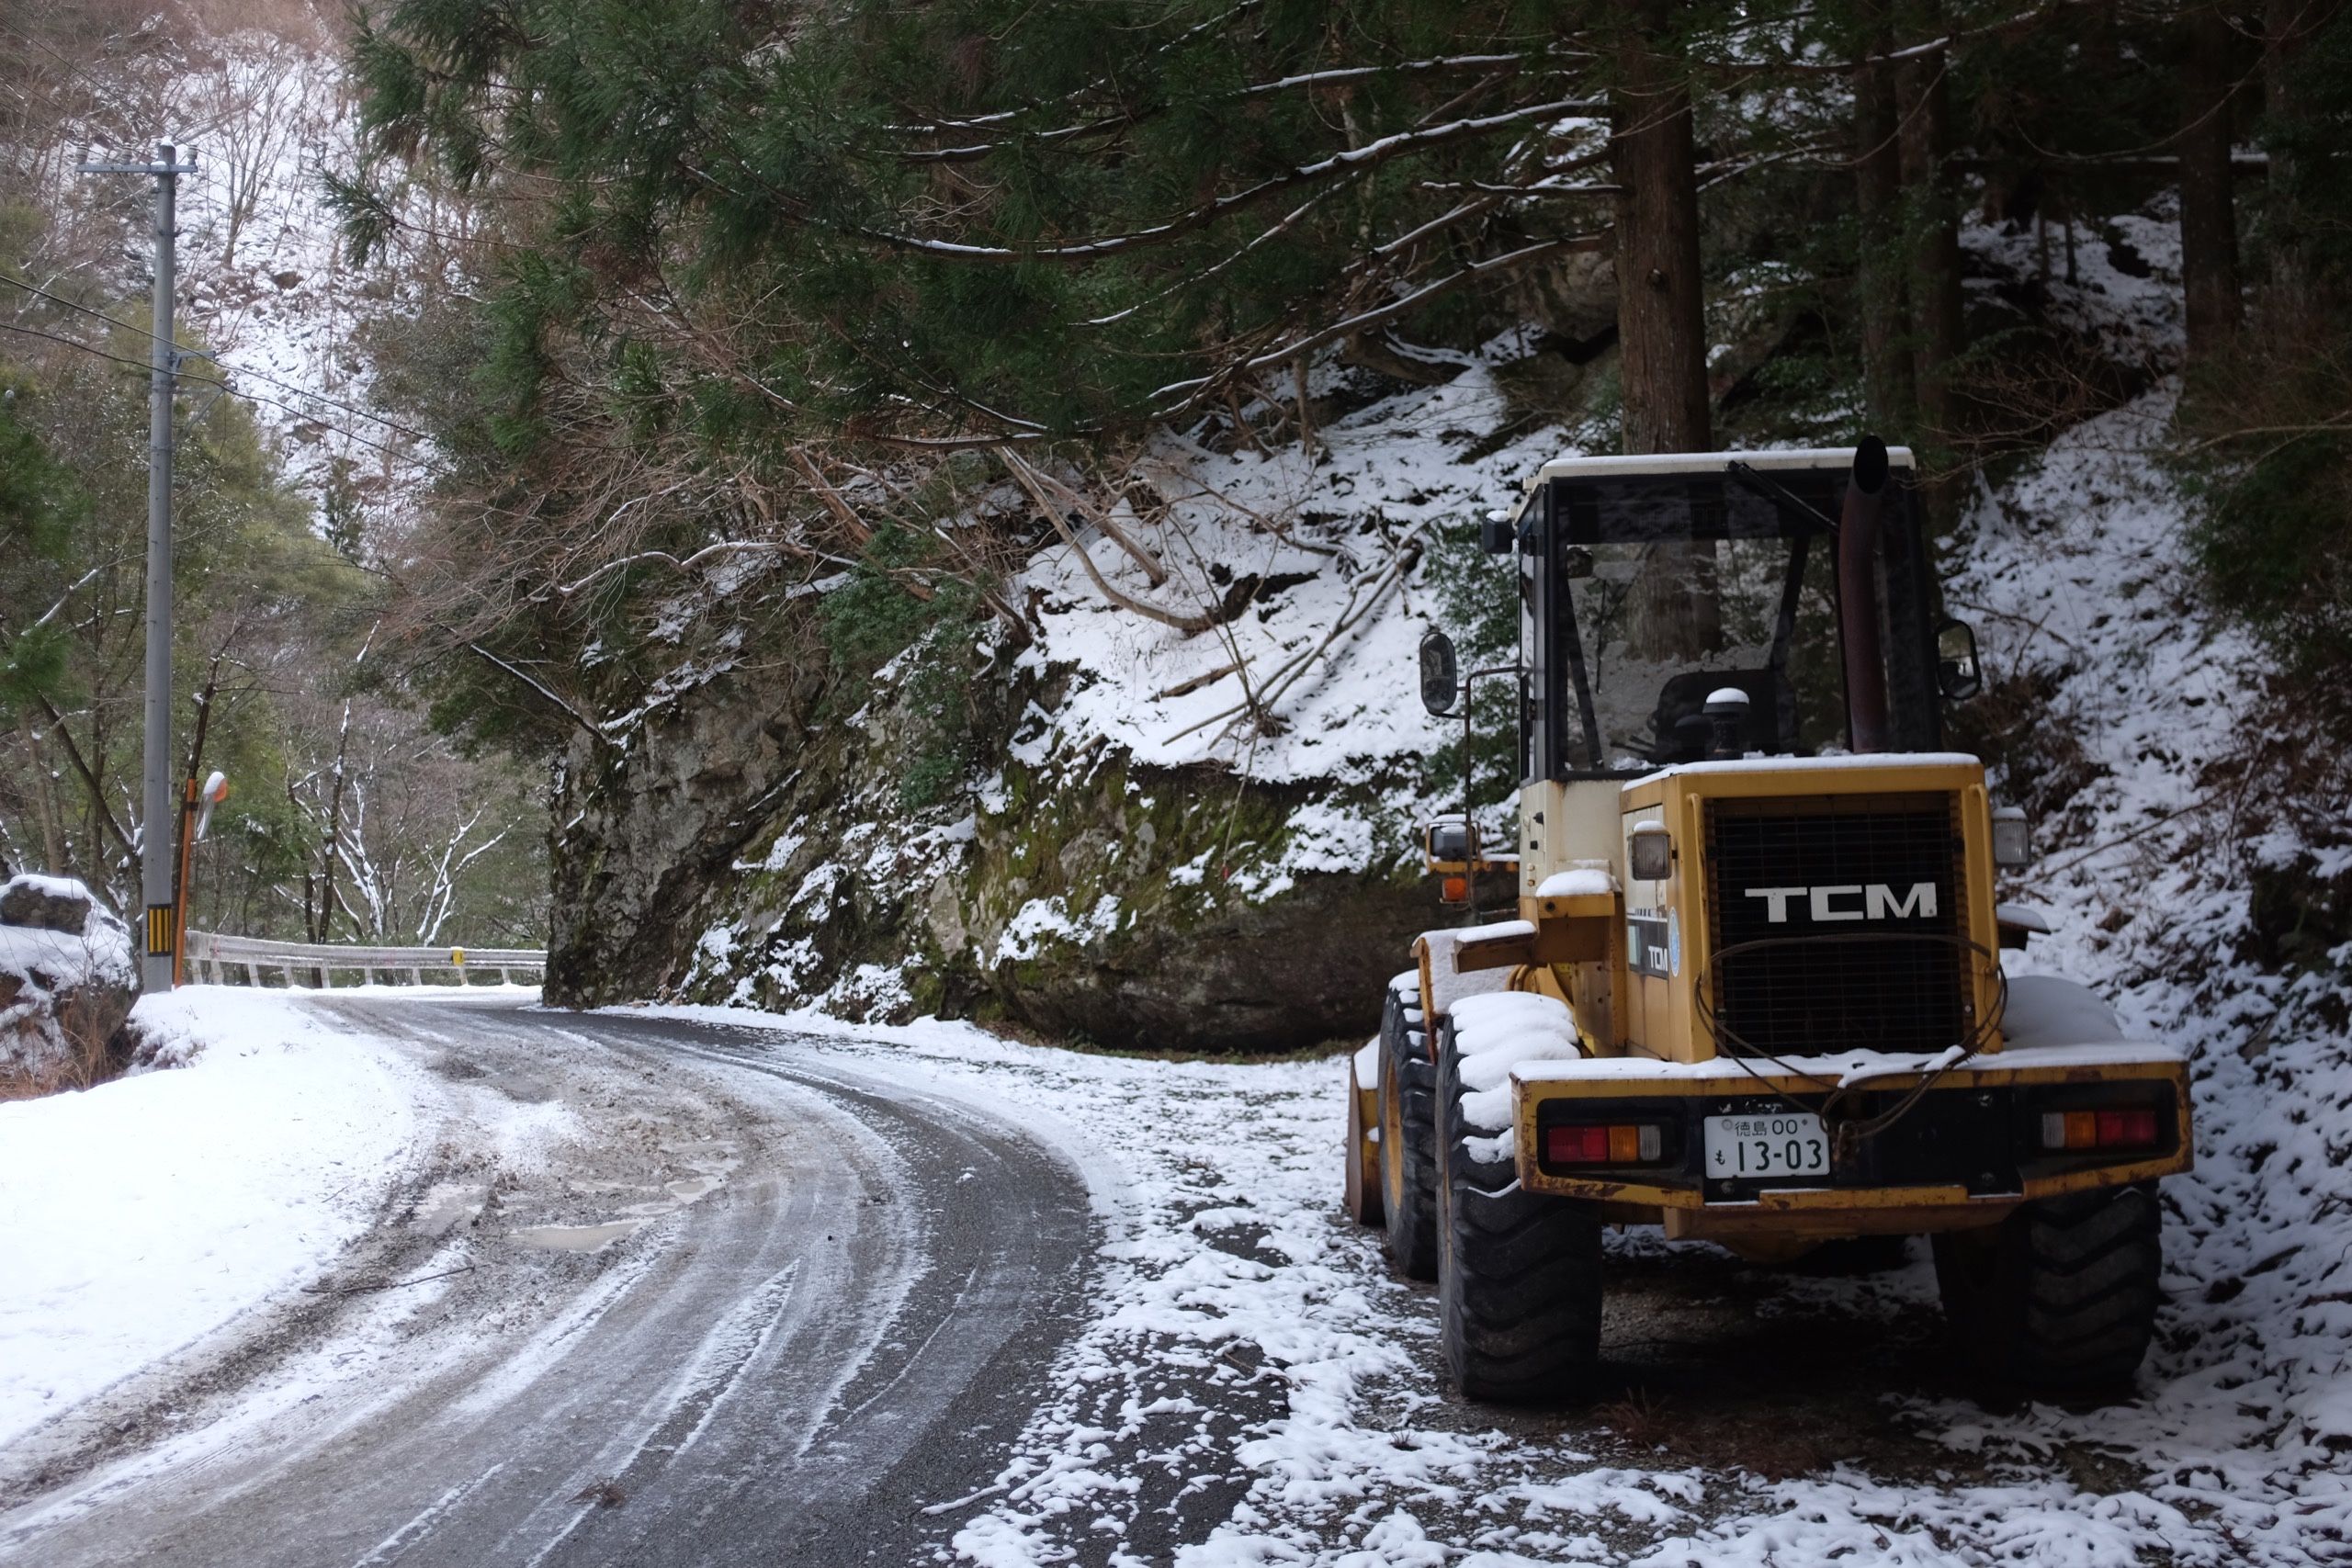 A bulldozer stands in the snow on a forest road.